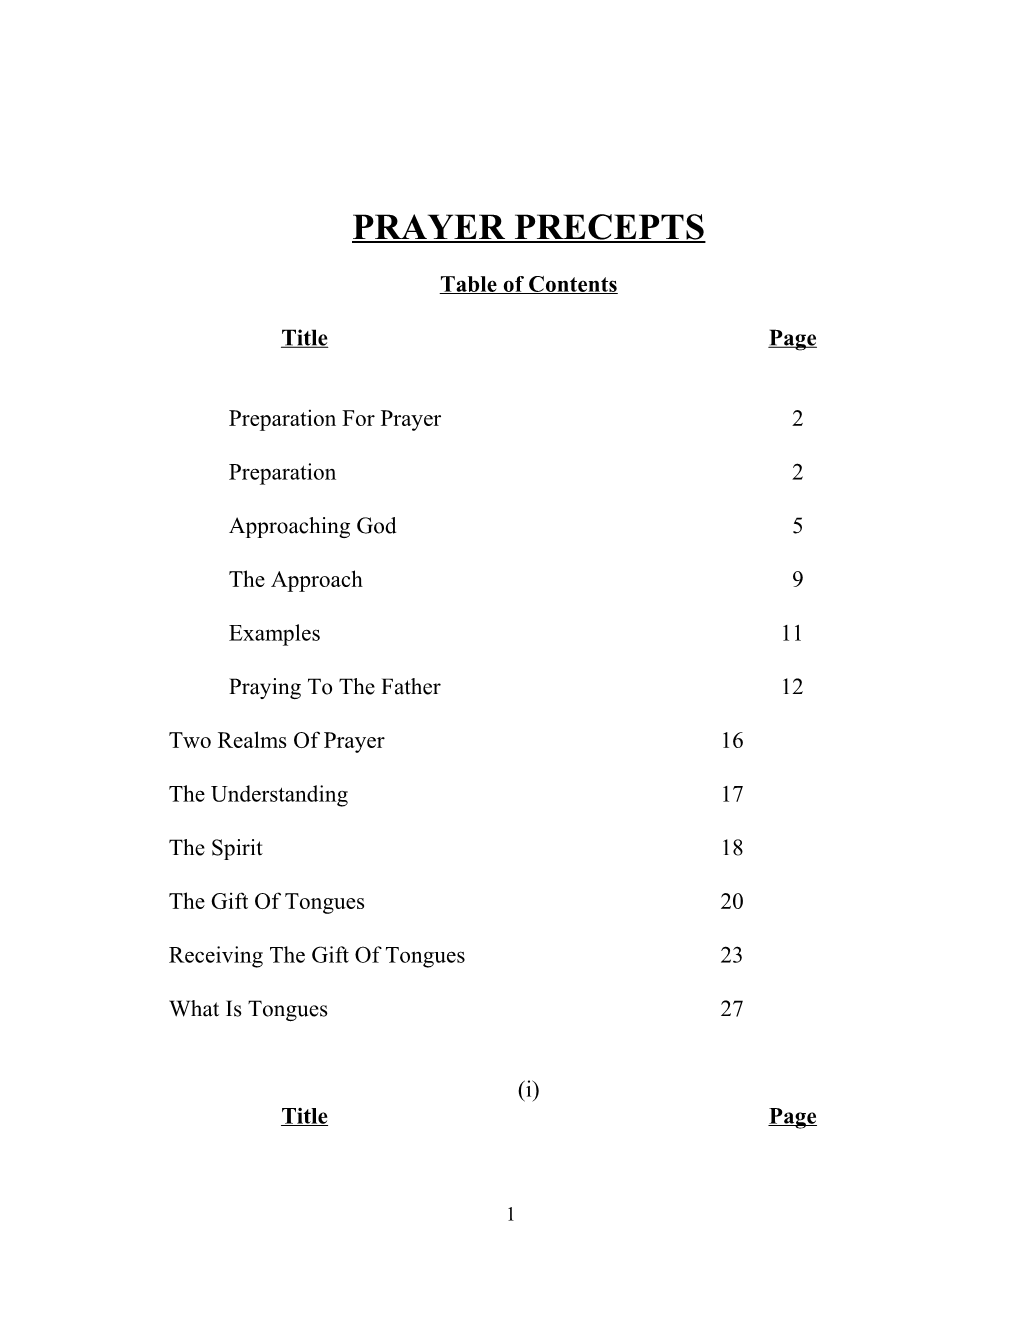 Table of Contents s425